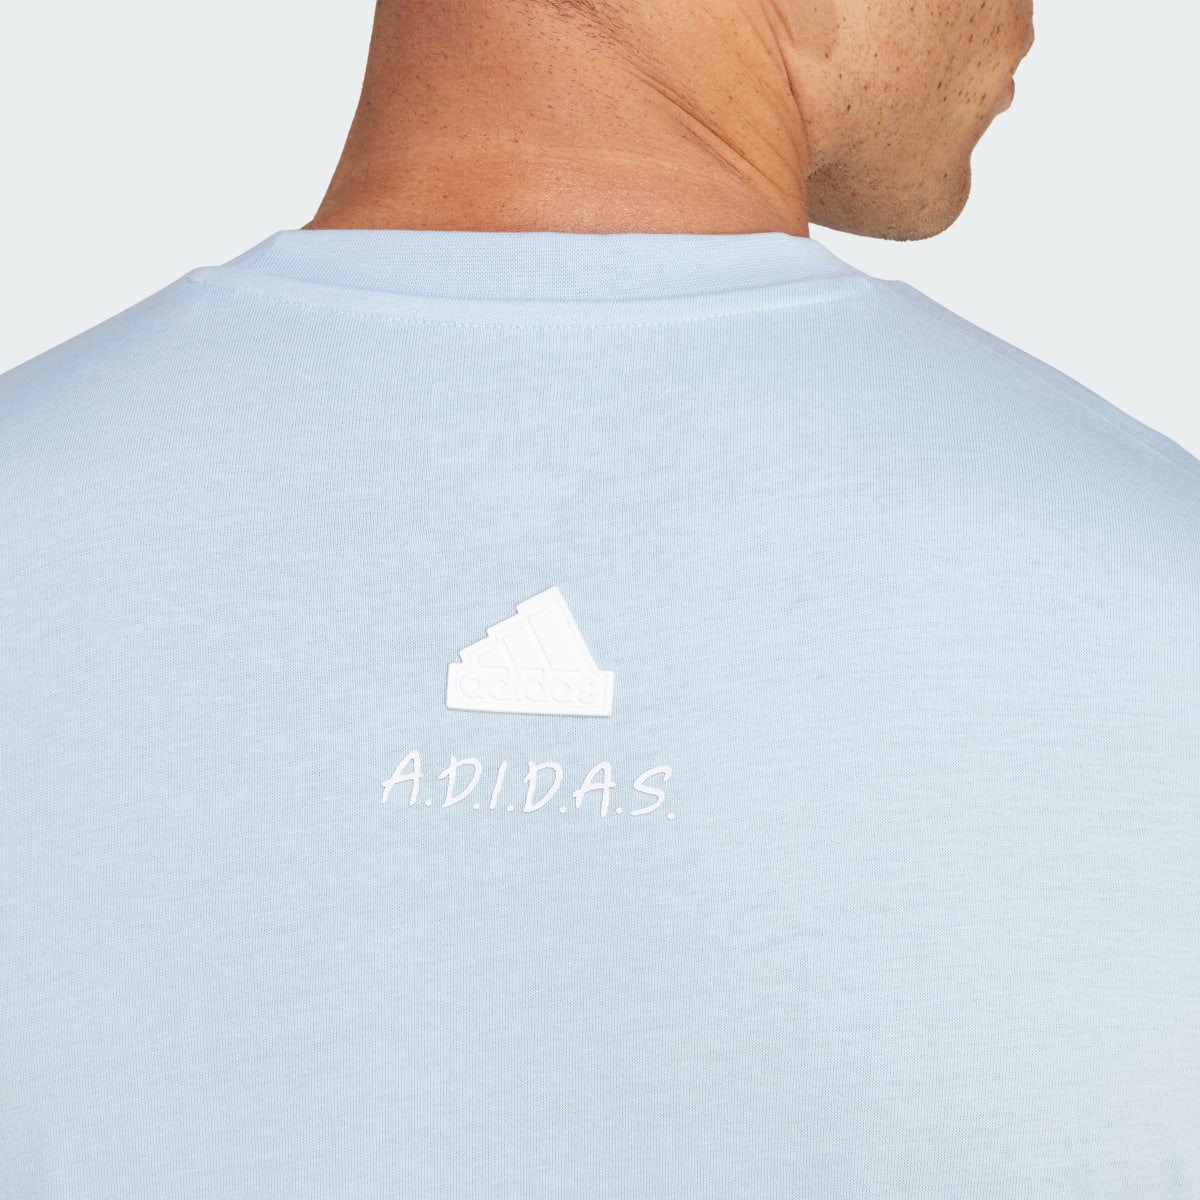 Adidas T-shirt All Day I Dream About... Graphic. 7